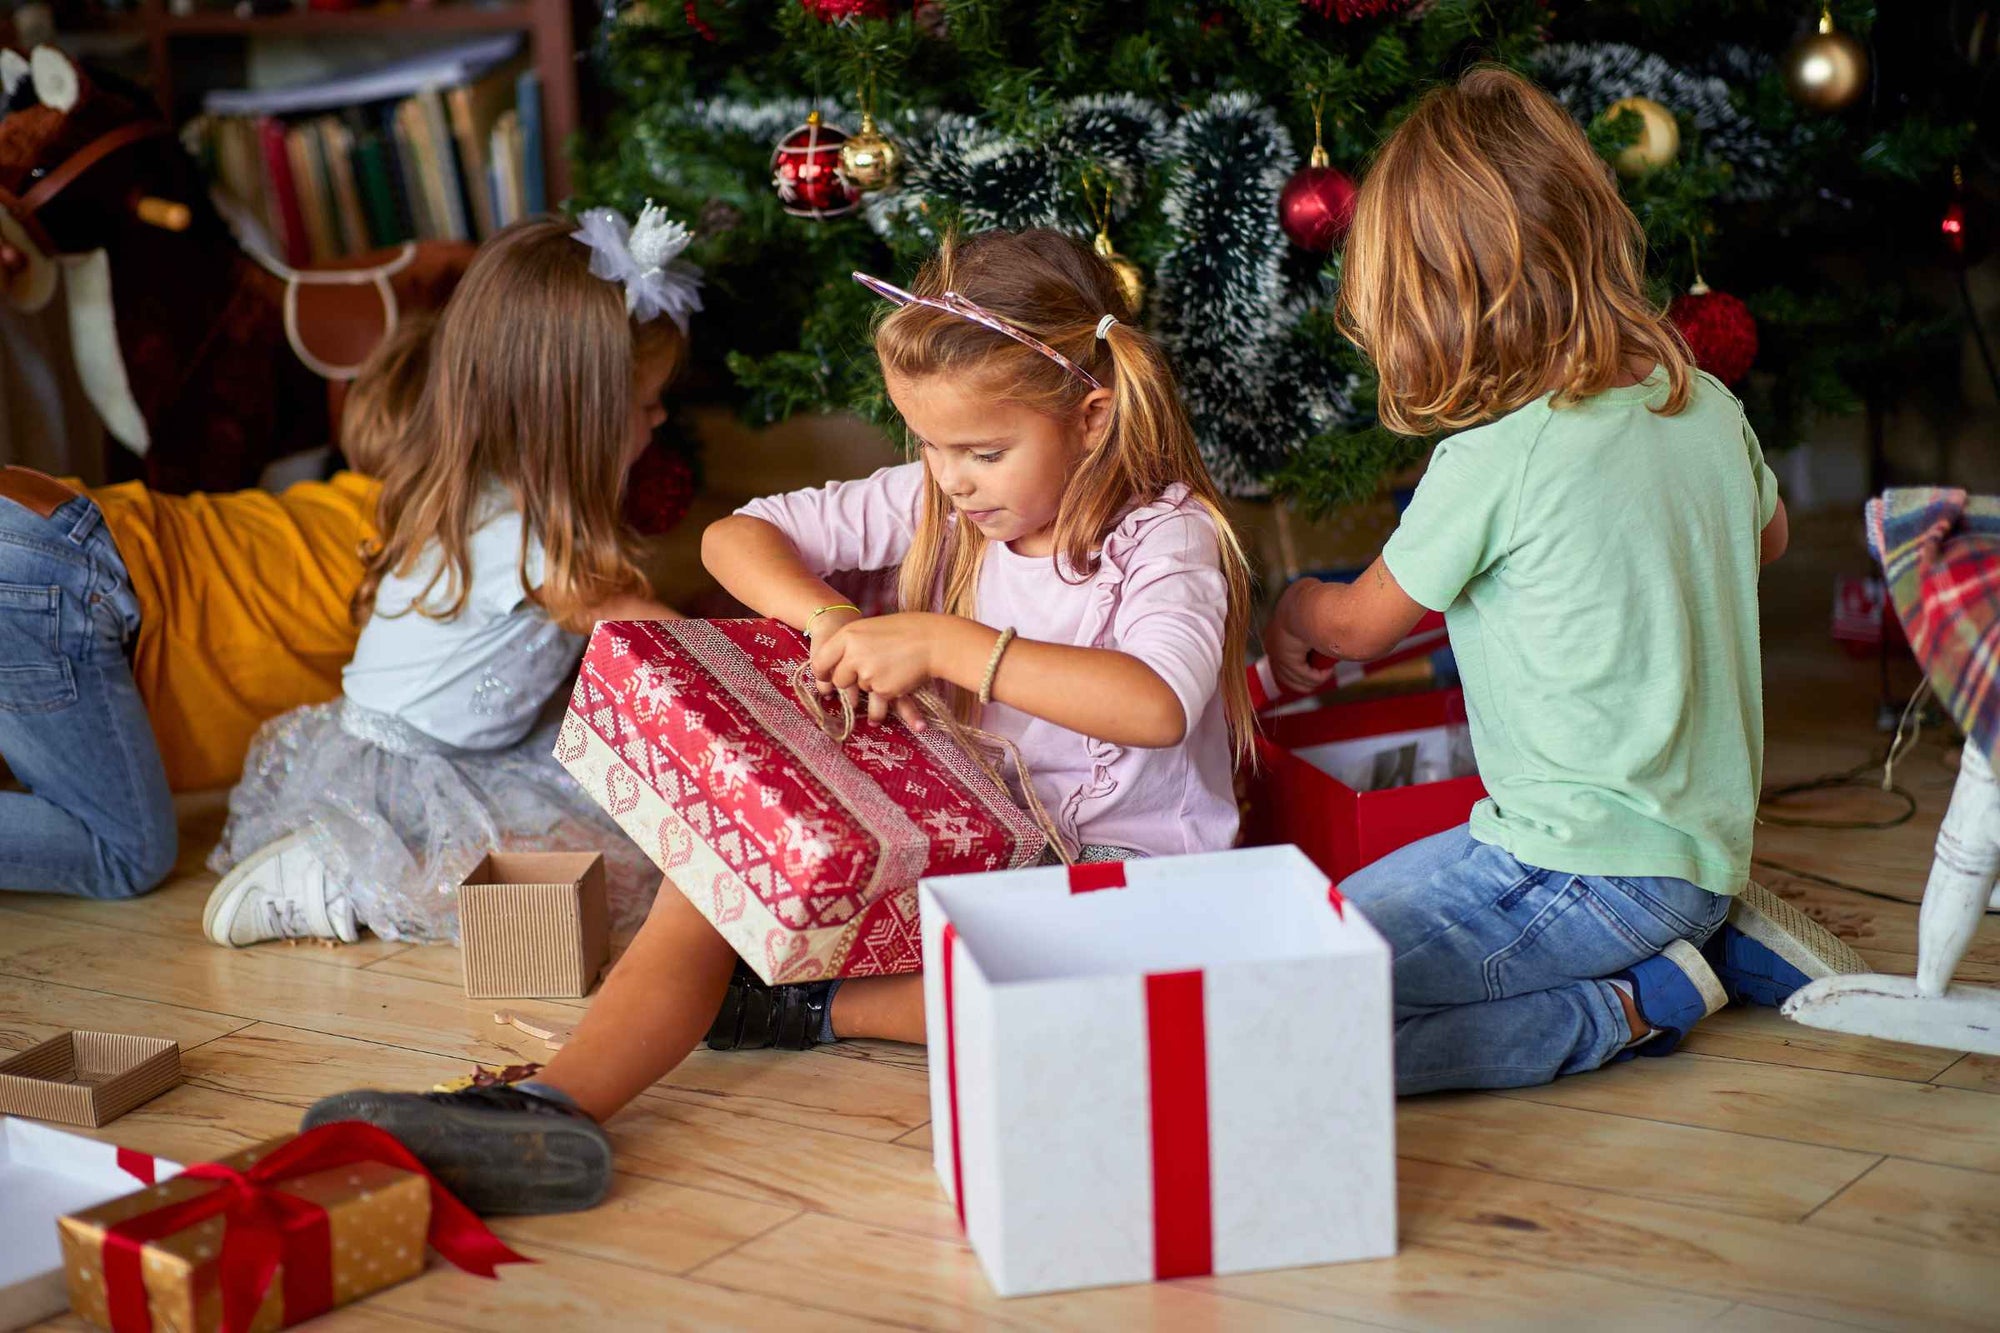 Children gathered around a Christmas tree opening eco-friendly gifts for kids